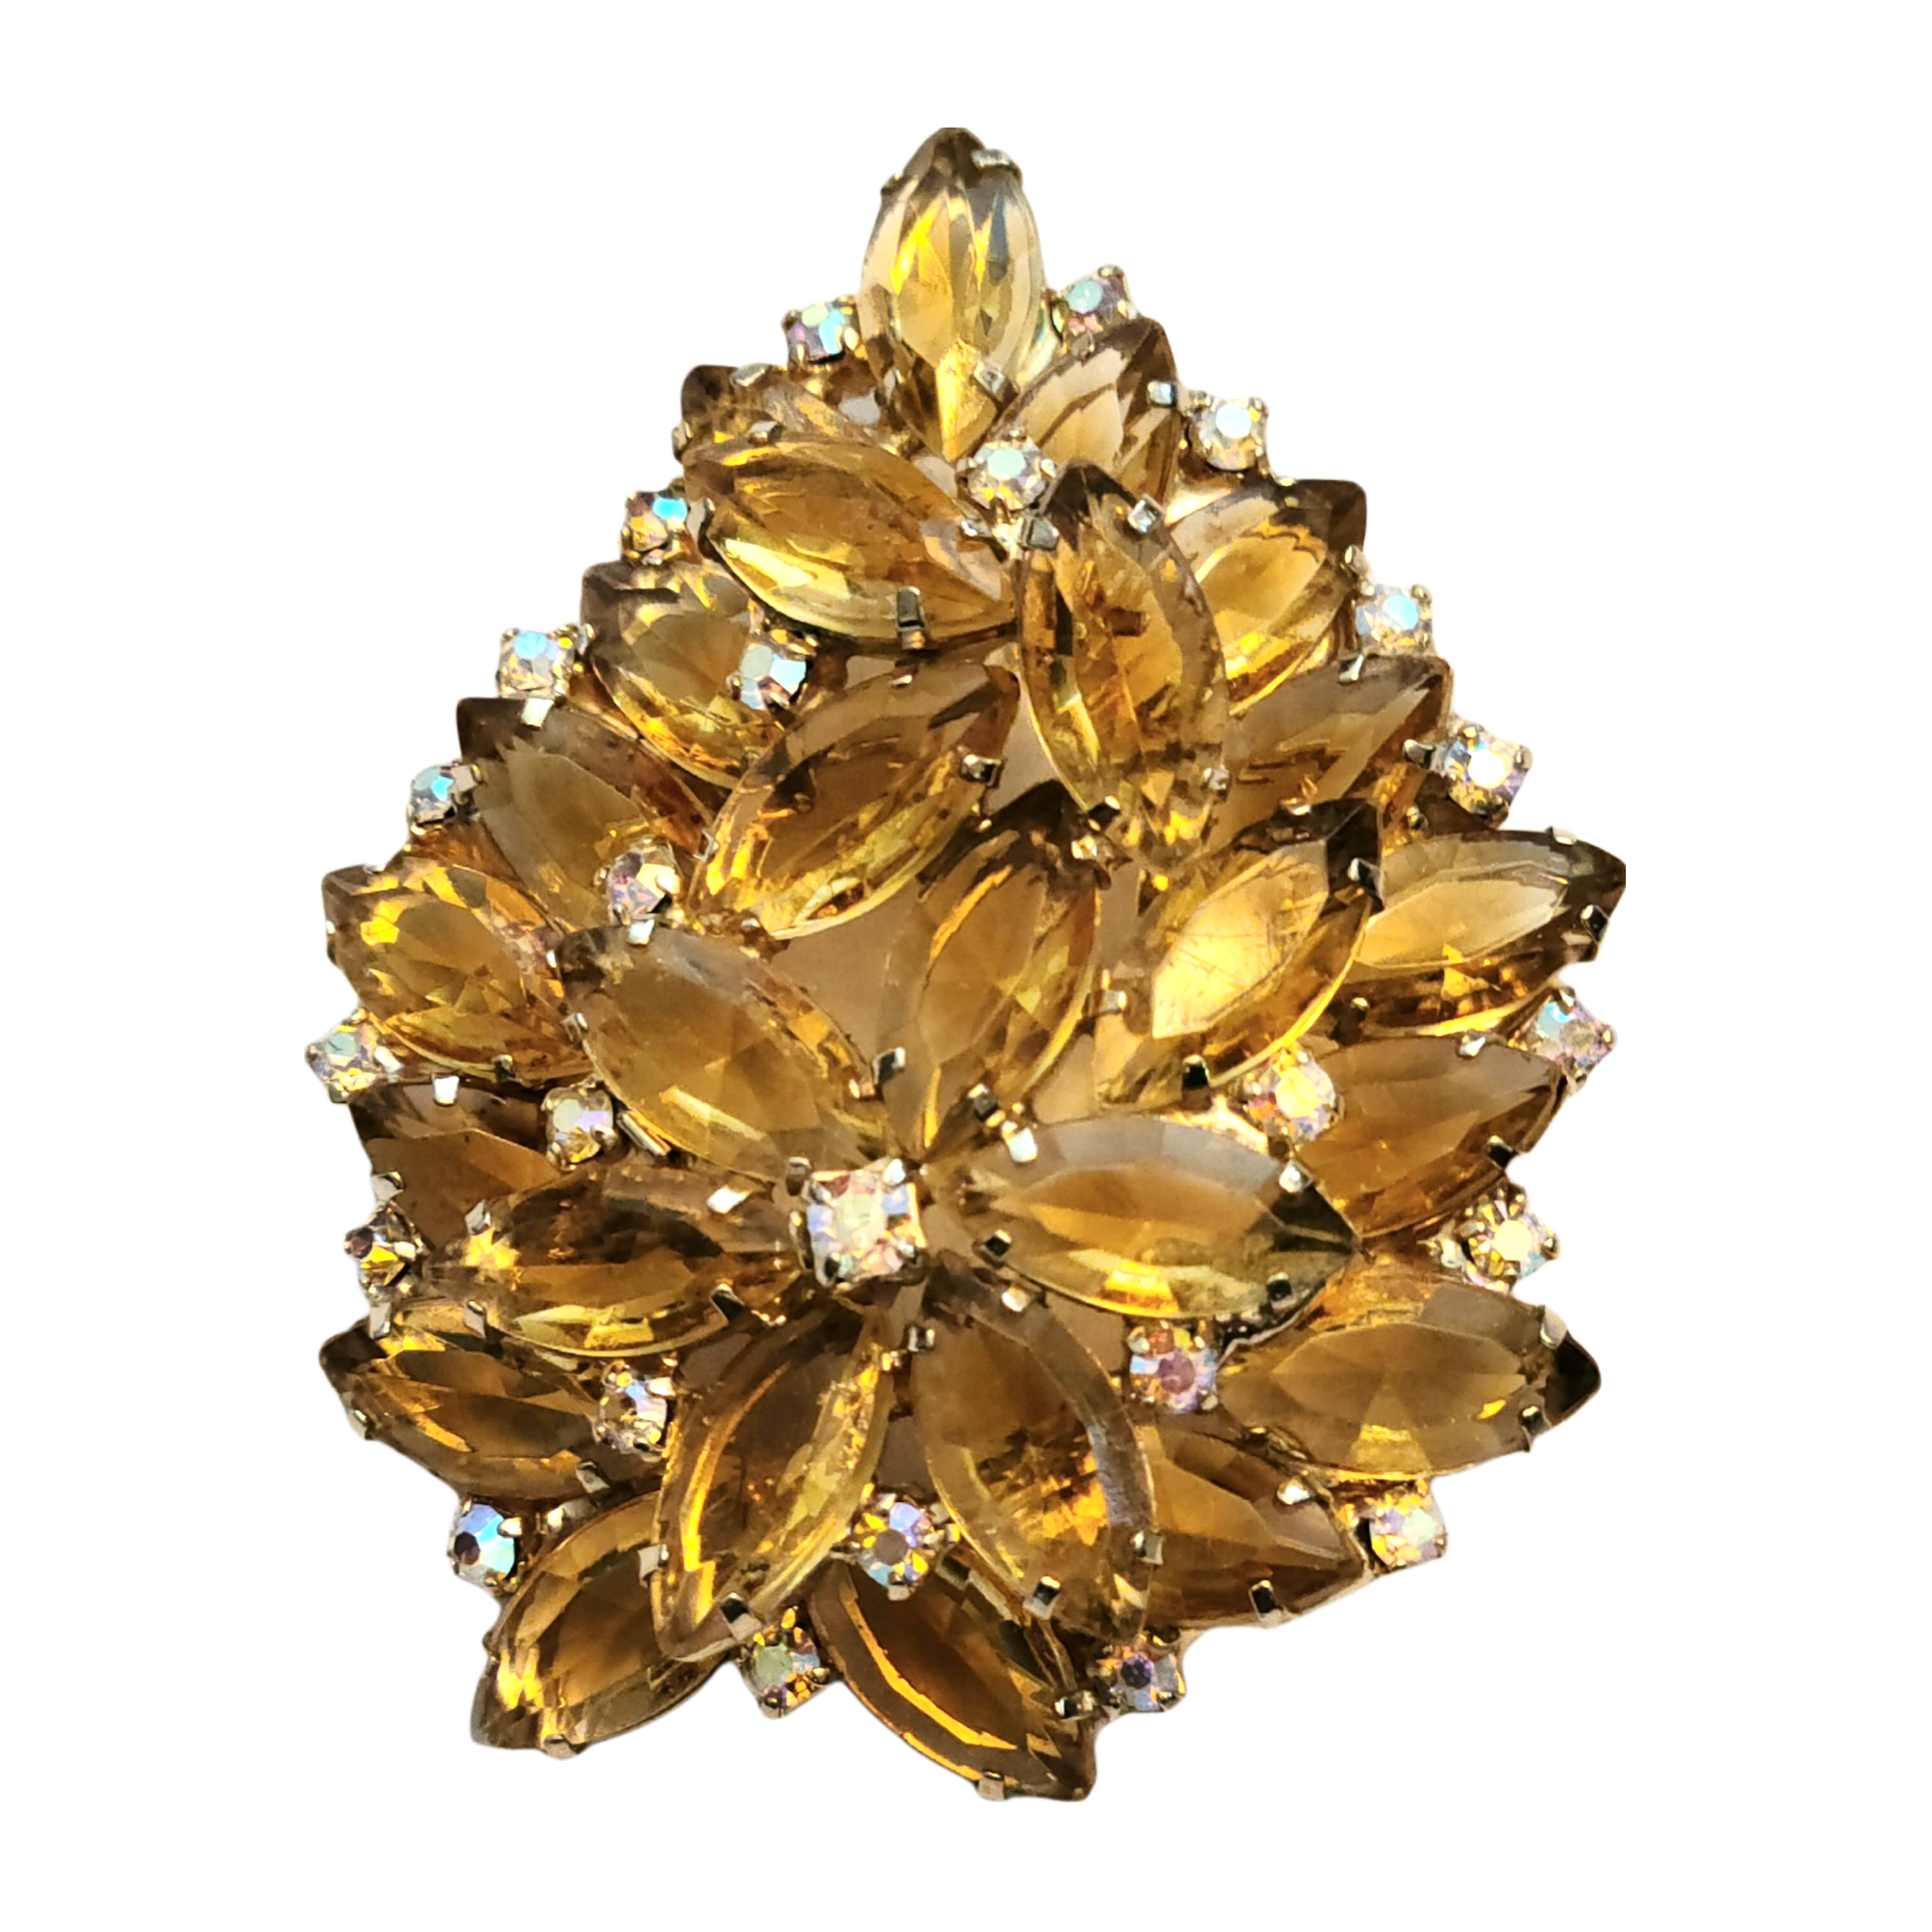 Vintage Pale Yellow Rhinestone Floral Brooch with Glittery Rhinestone Accents